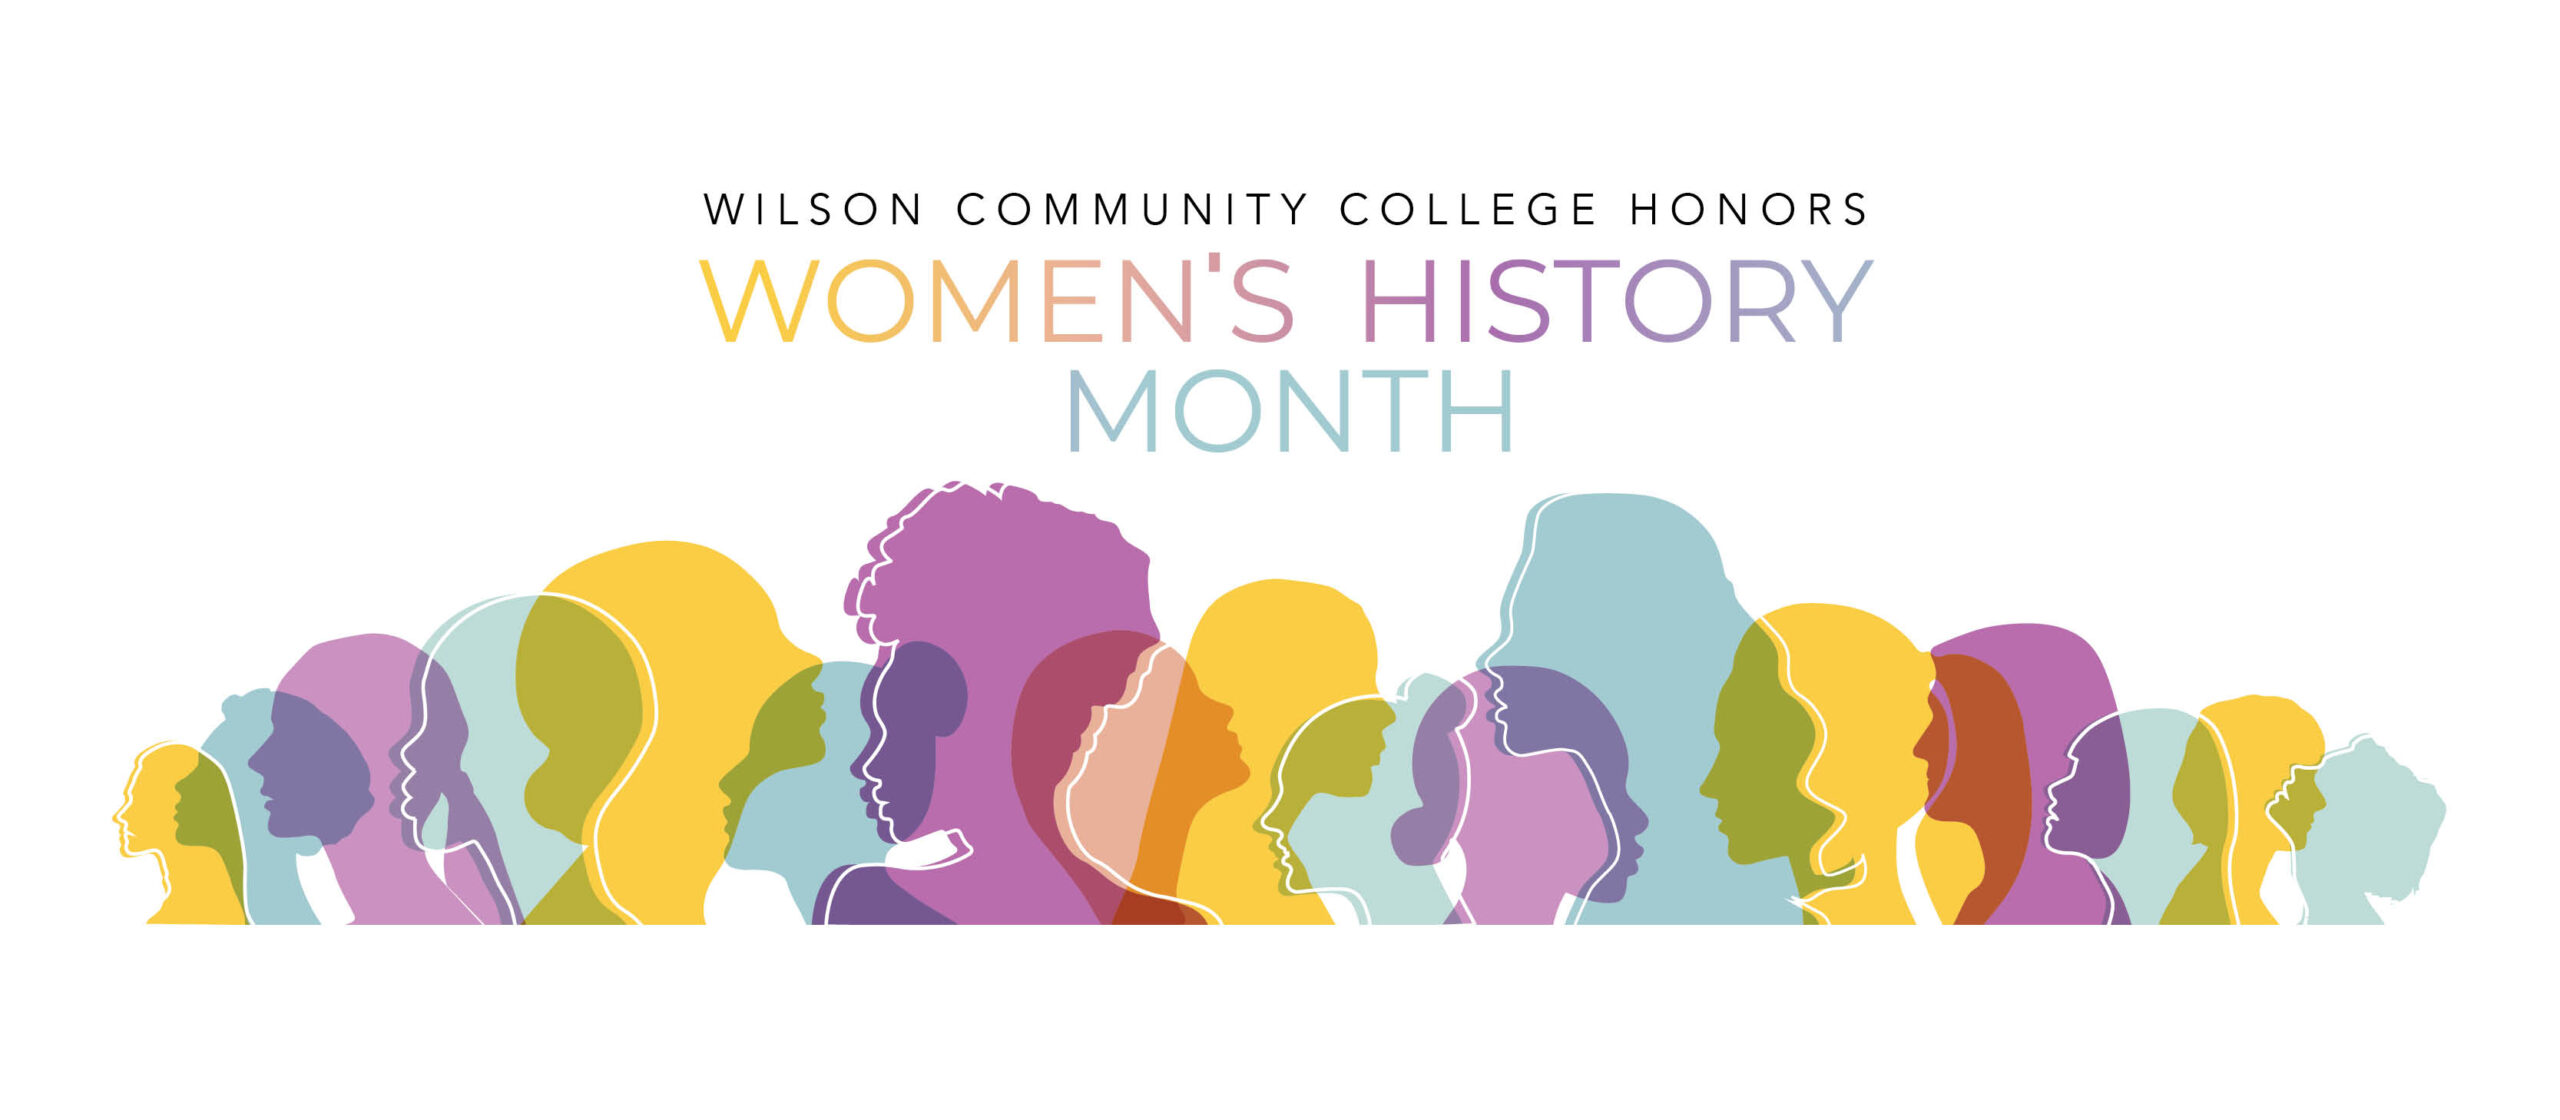 Wilson Community College honors Women's History Month